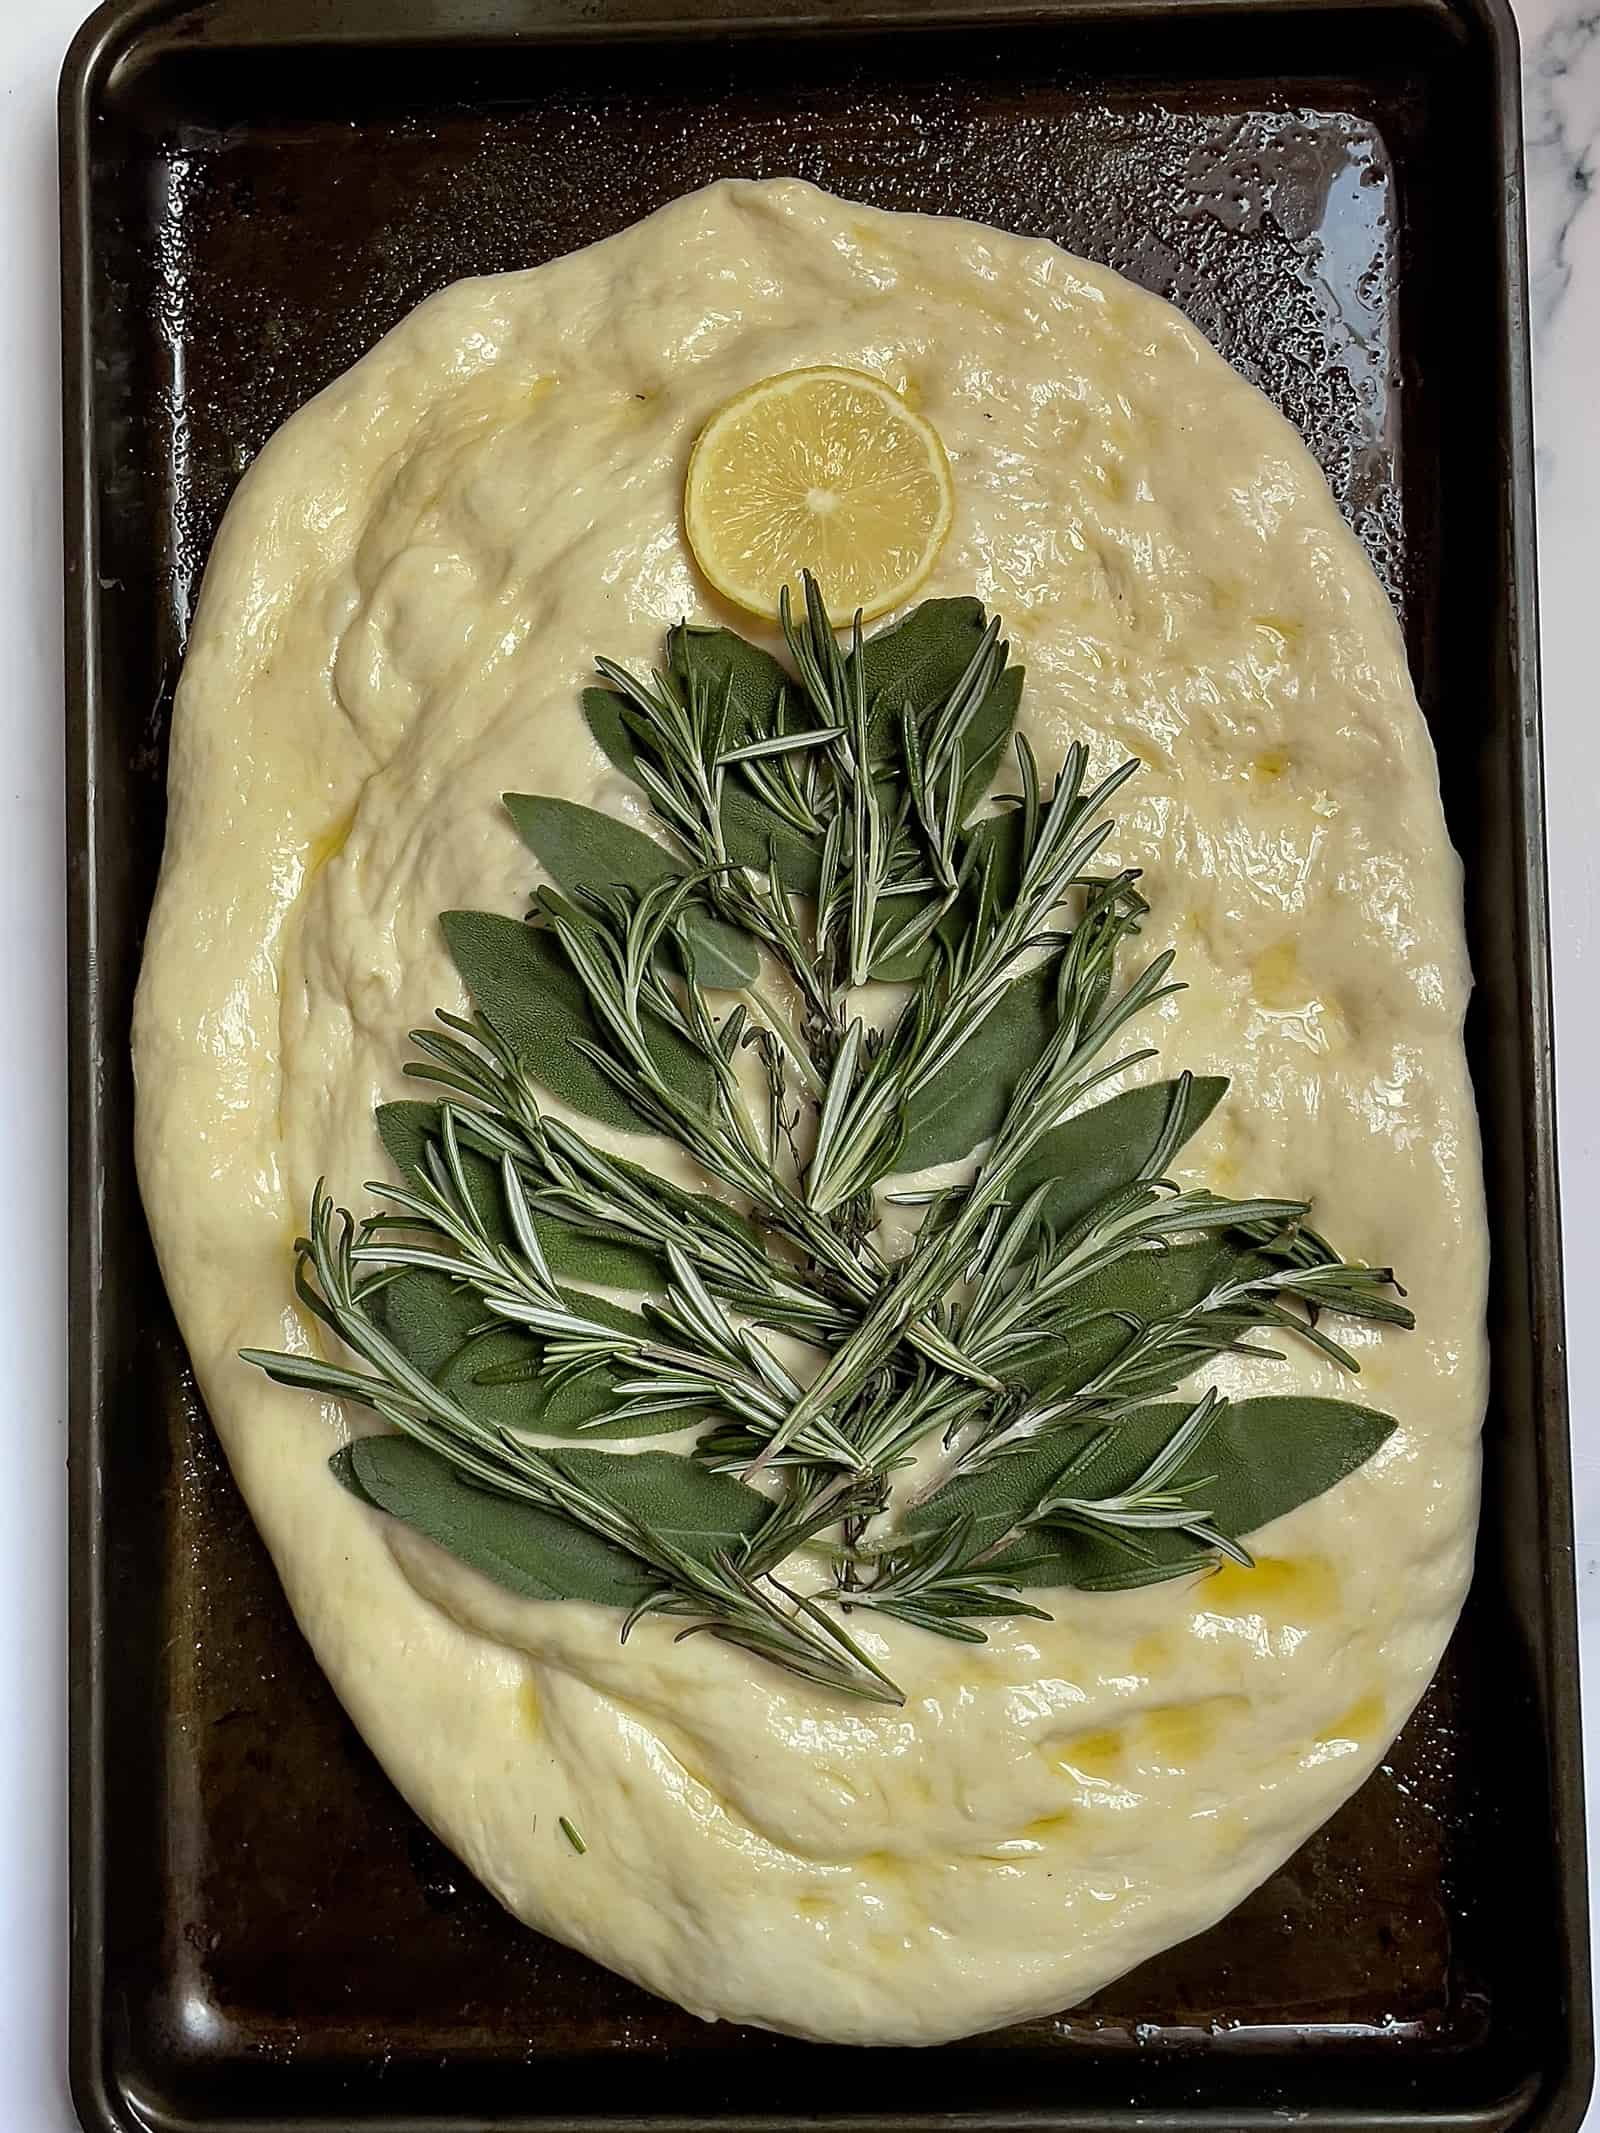 sage leaves and rosemary spread out around a piece of thyme on focaccia bread with a lemon slice as the star